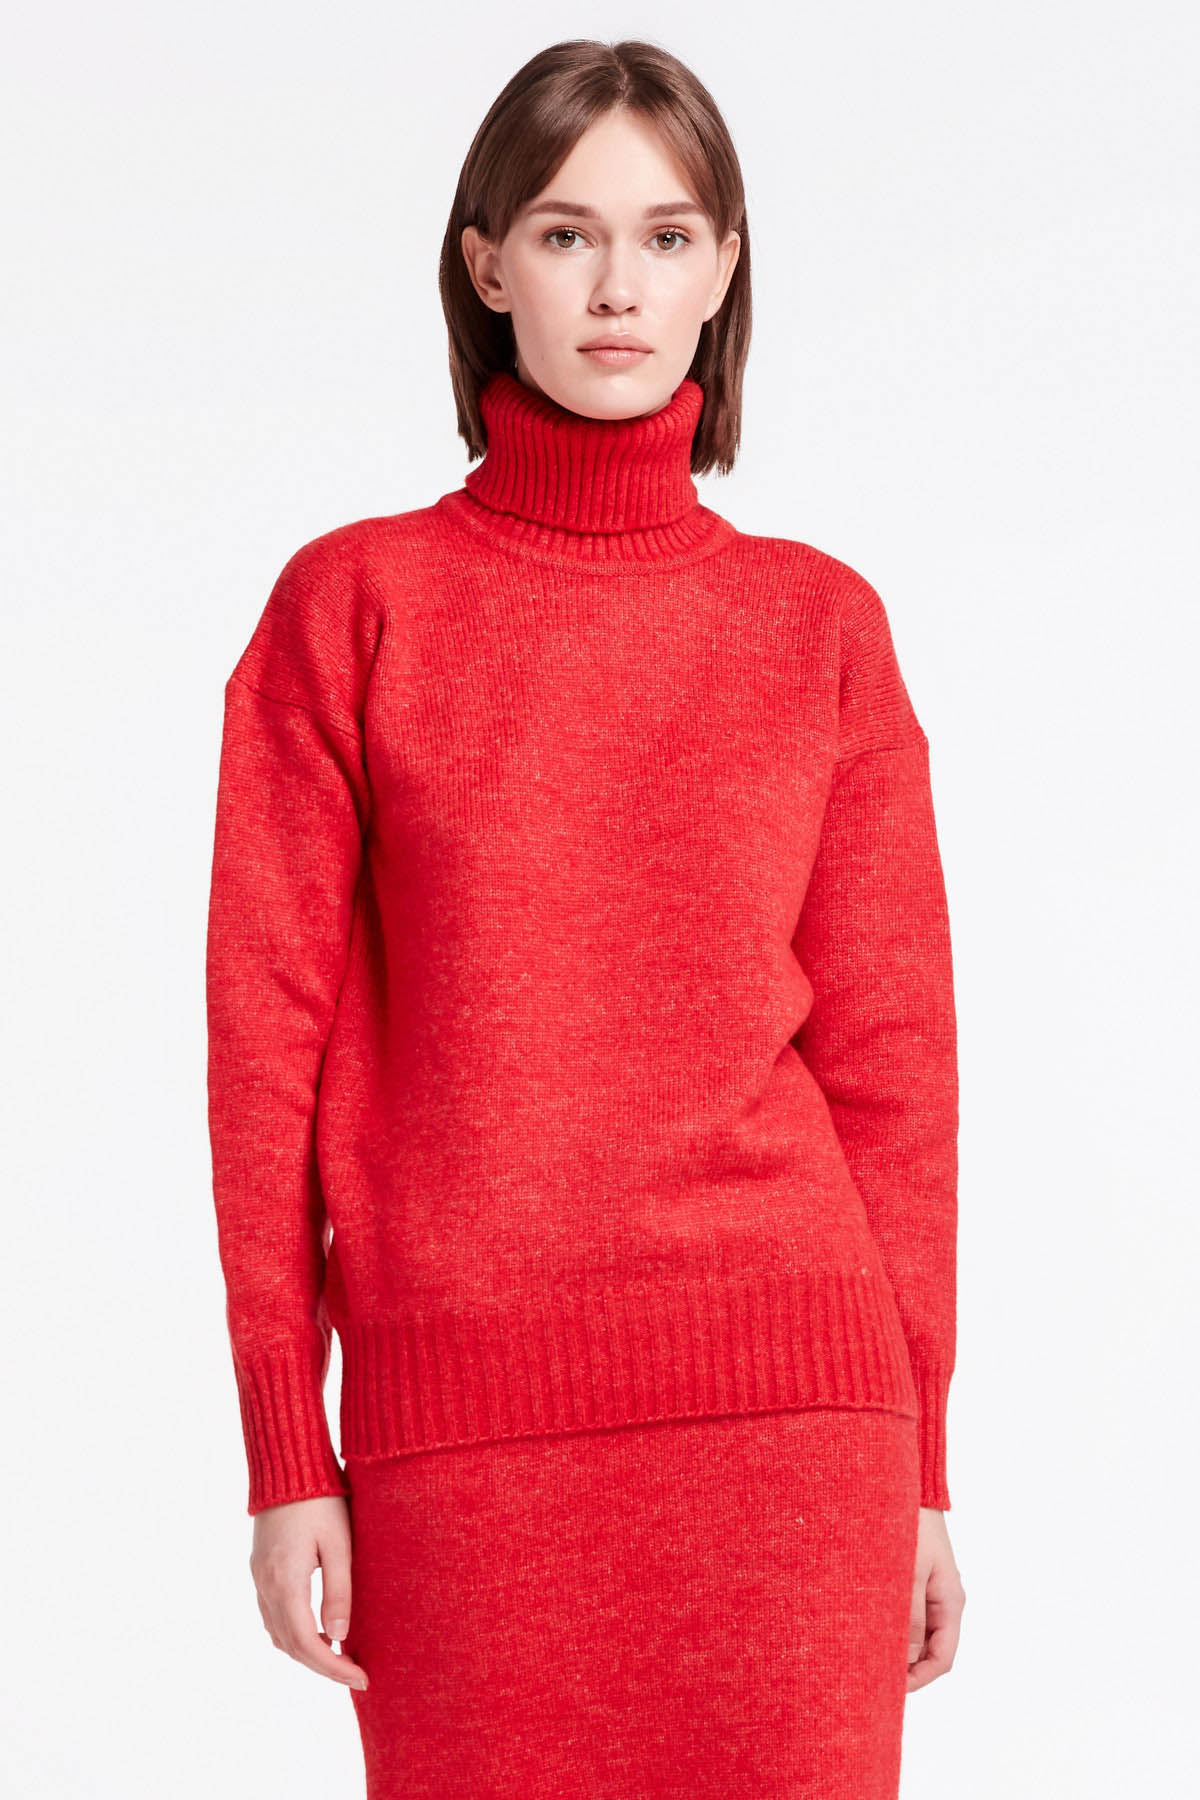 Red knit sweater, photo 1